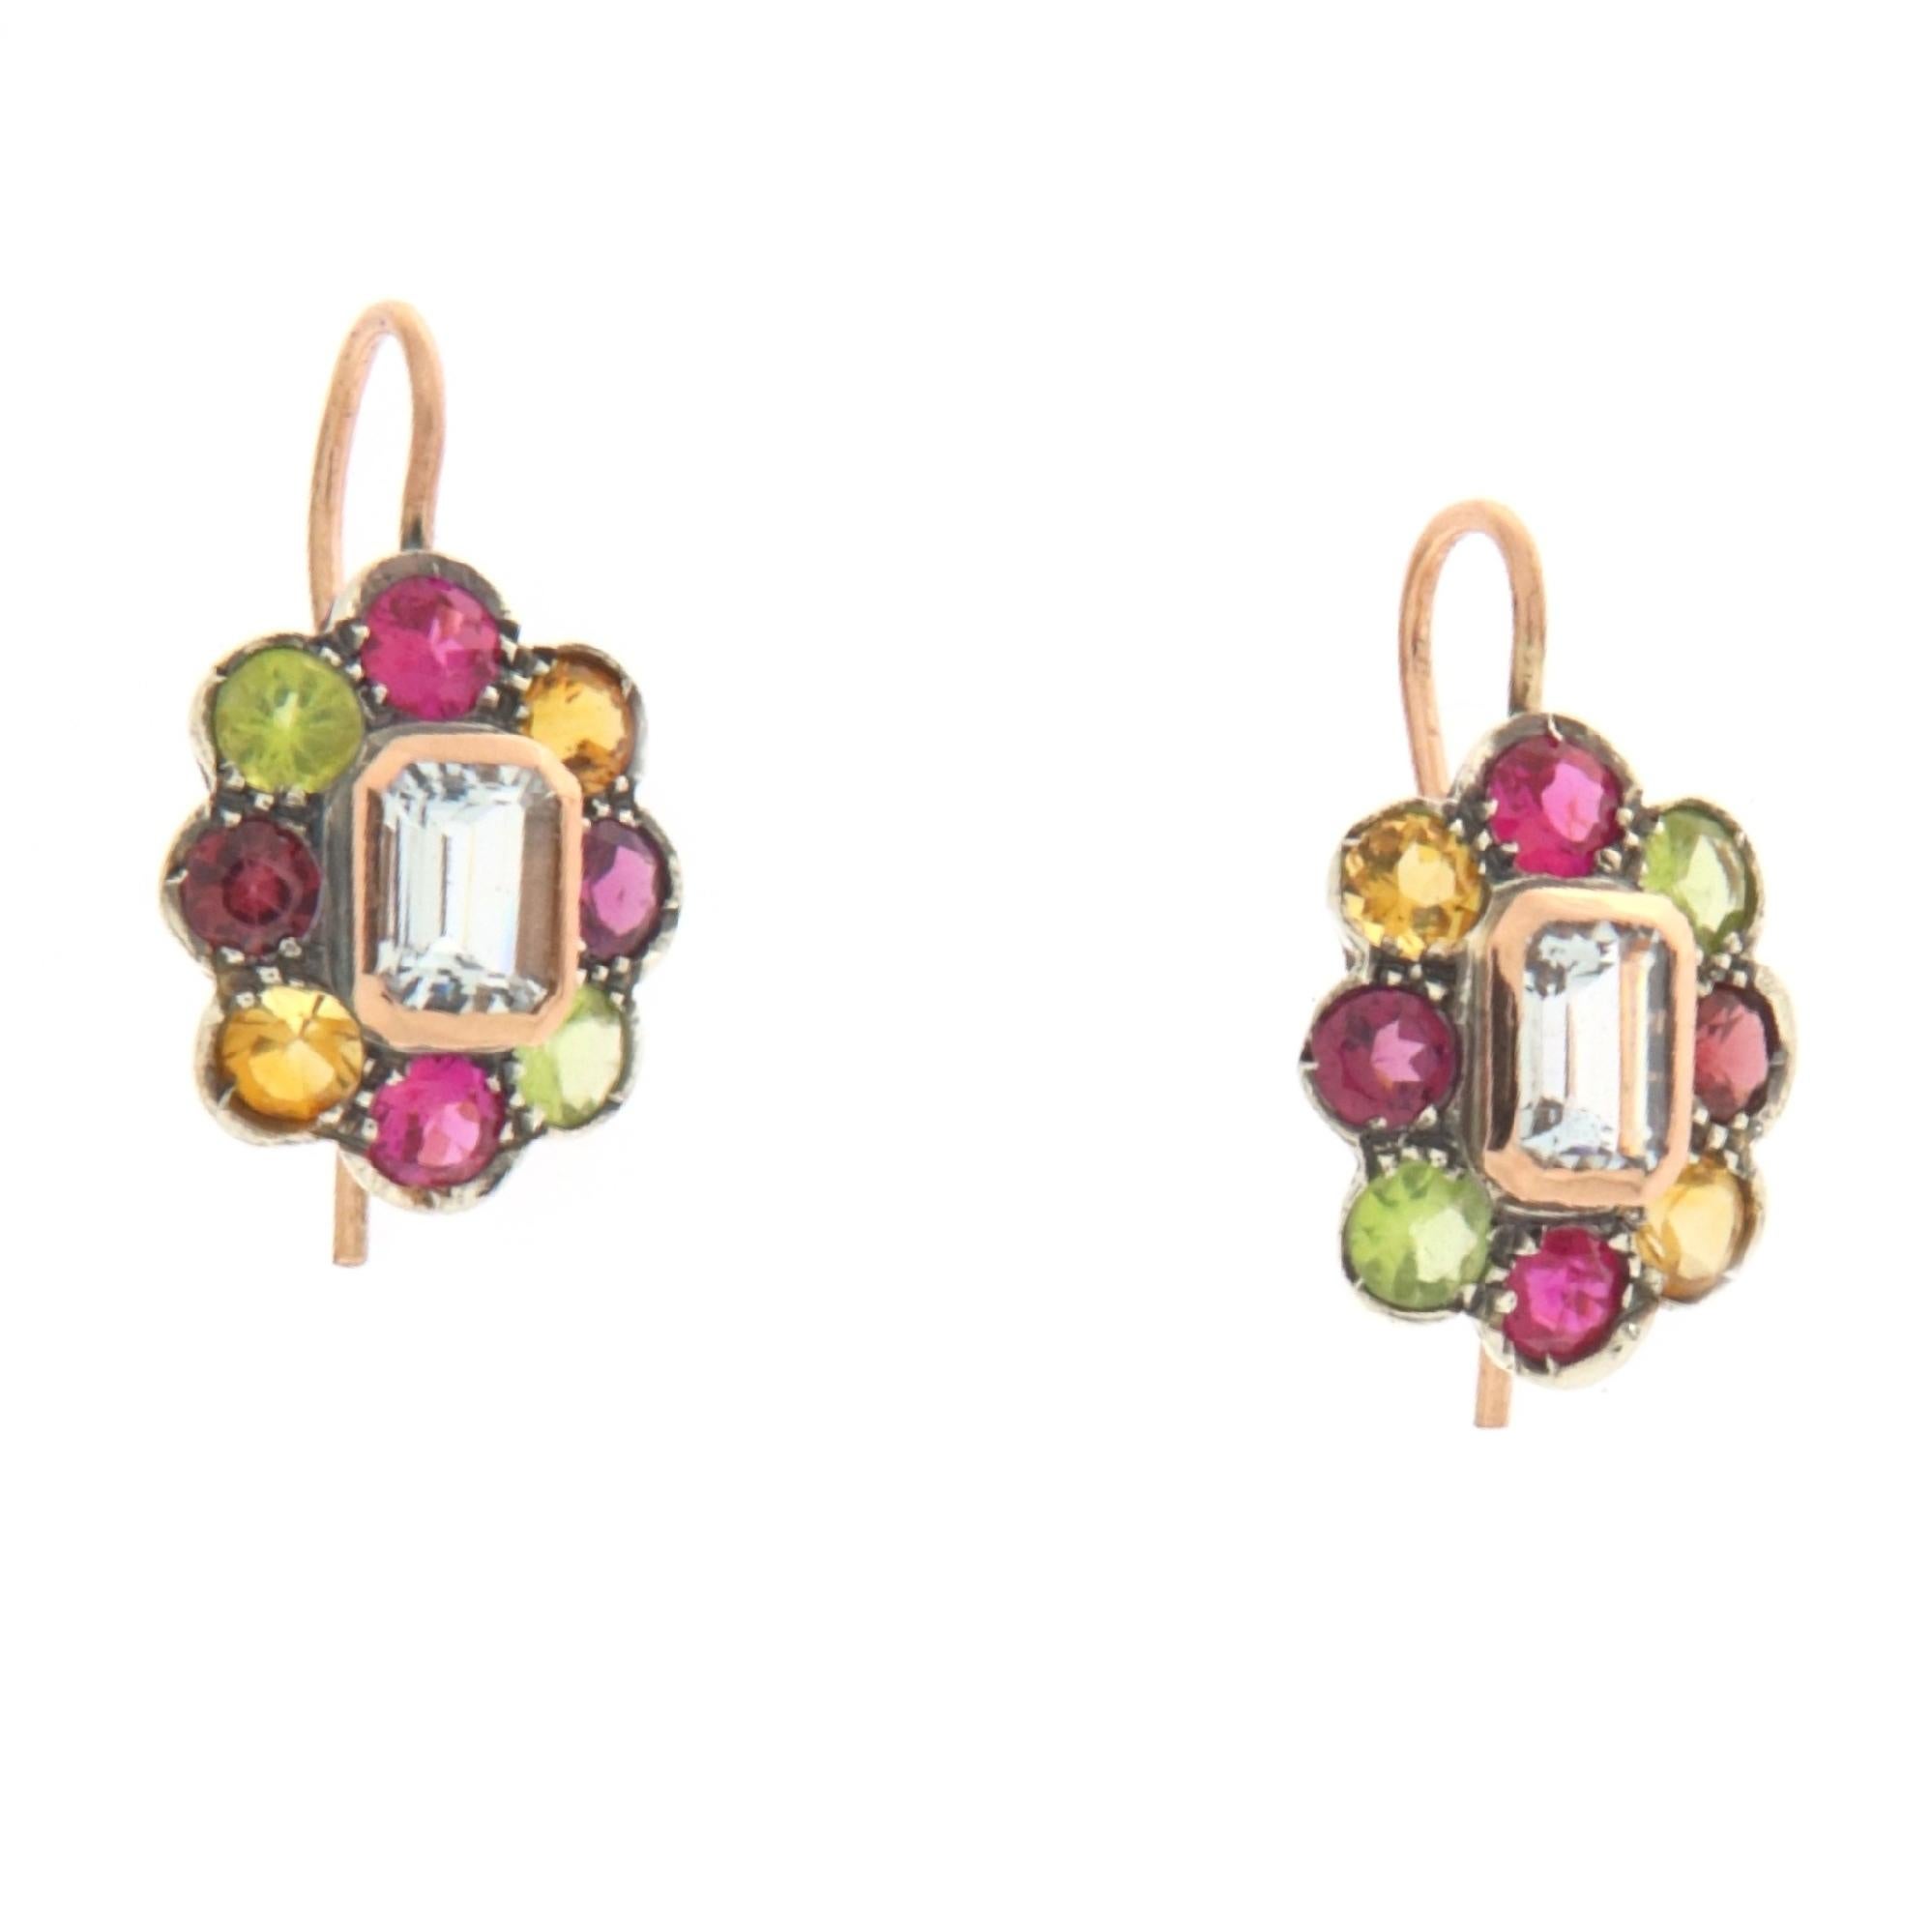 This pair of earrings, masterfully crafted in a refined combination of 14-karat yellow gold and sterling silver, is a true celebration of nature and its abundant color palette. At the heart of each earring sits an aquamarine, whose crystal-clear